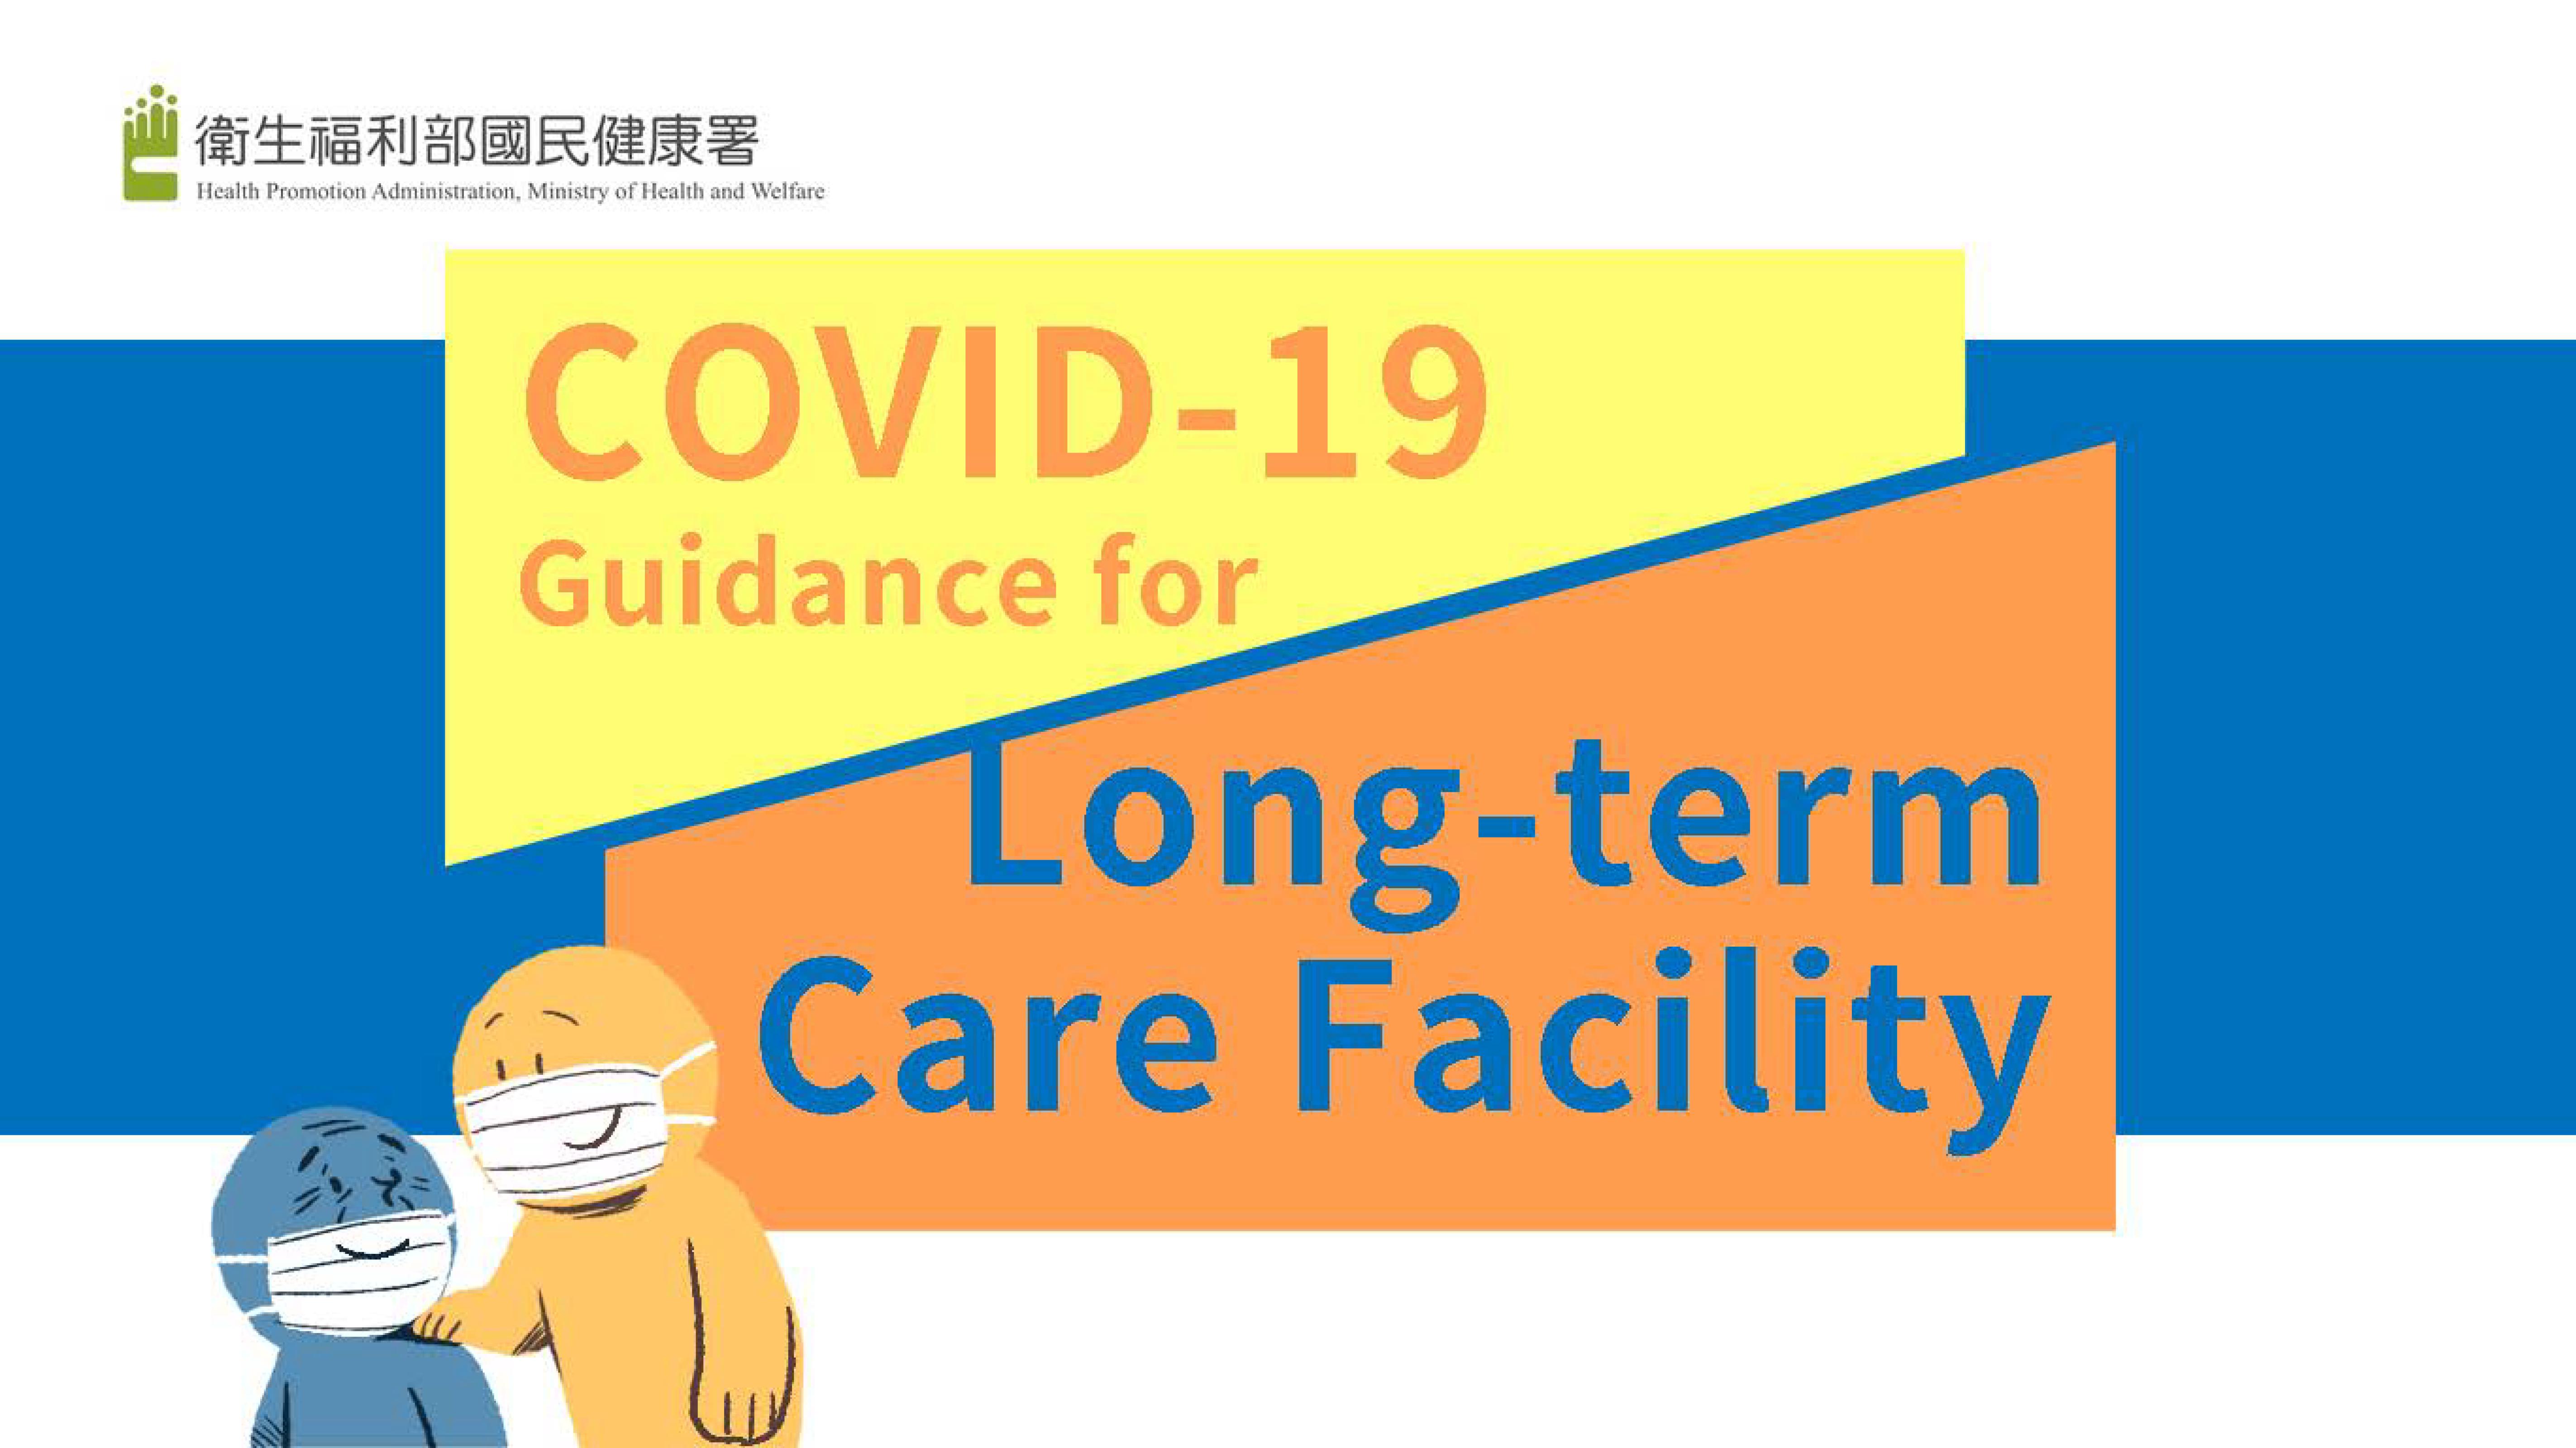 COVID-19 Guidance for Long-term Care Facility